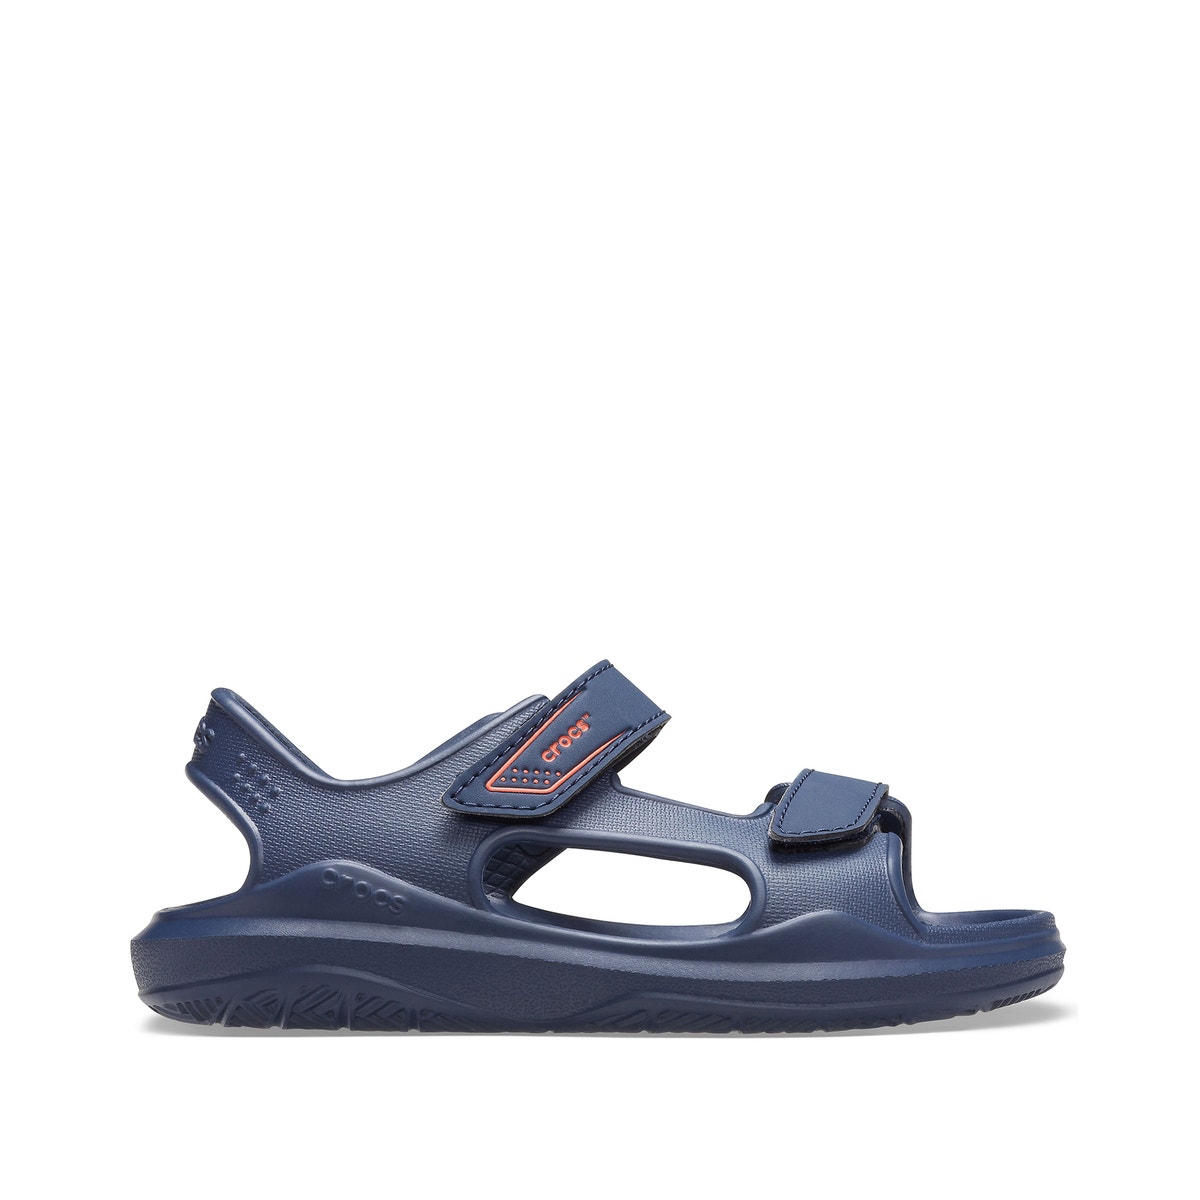 Swiftwater Expedition Sandals